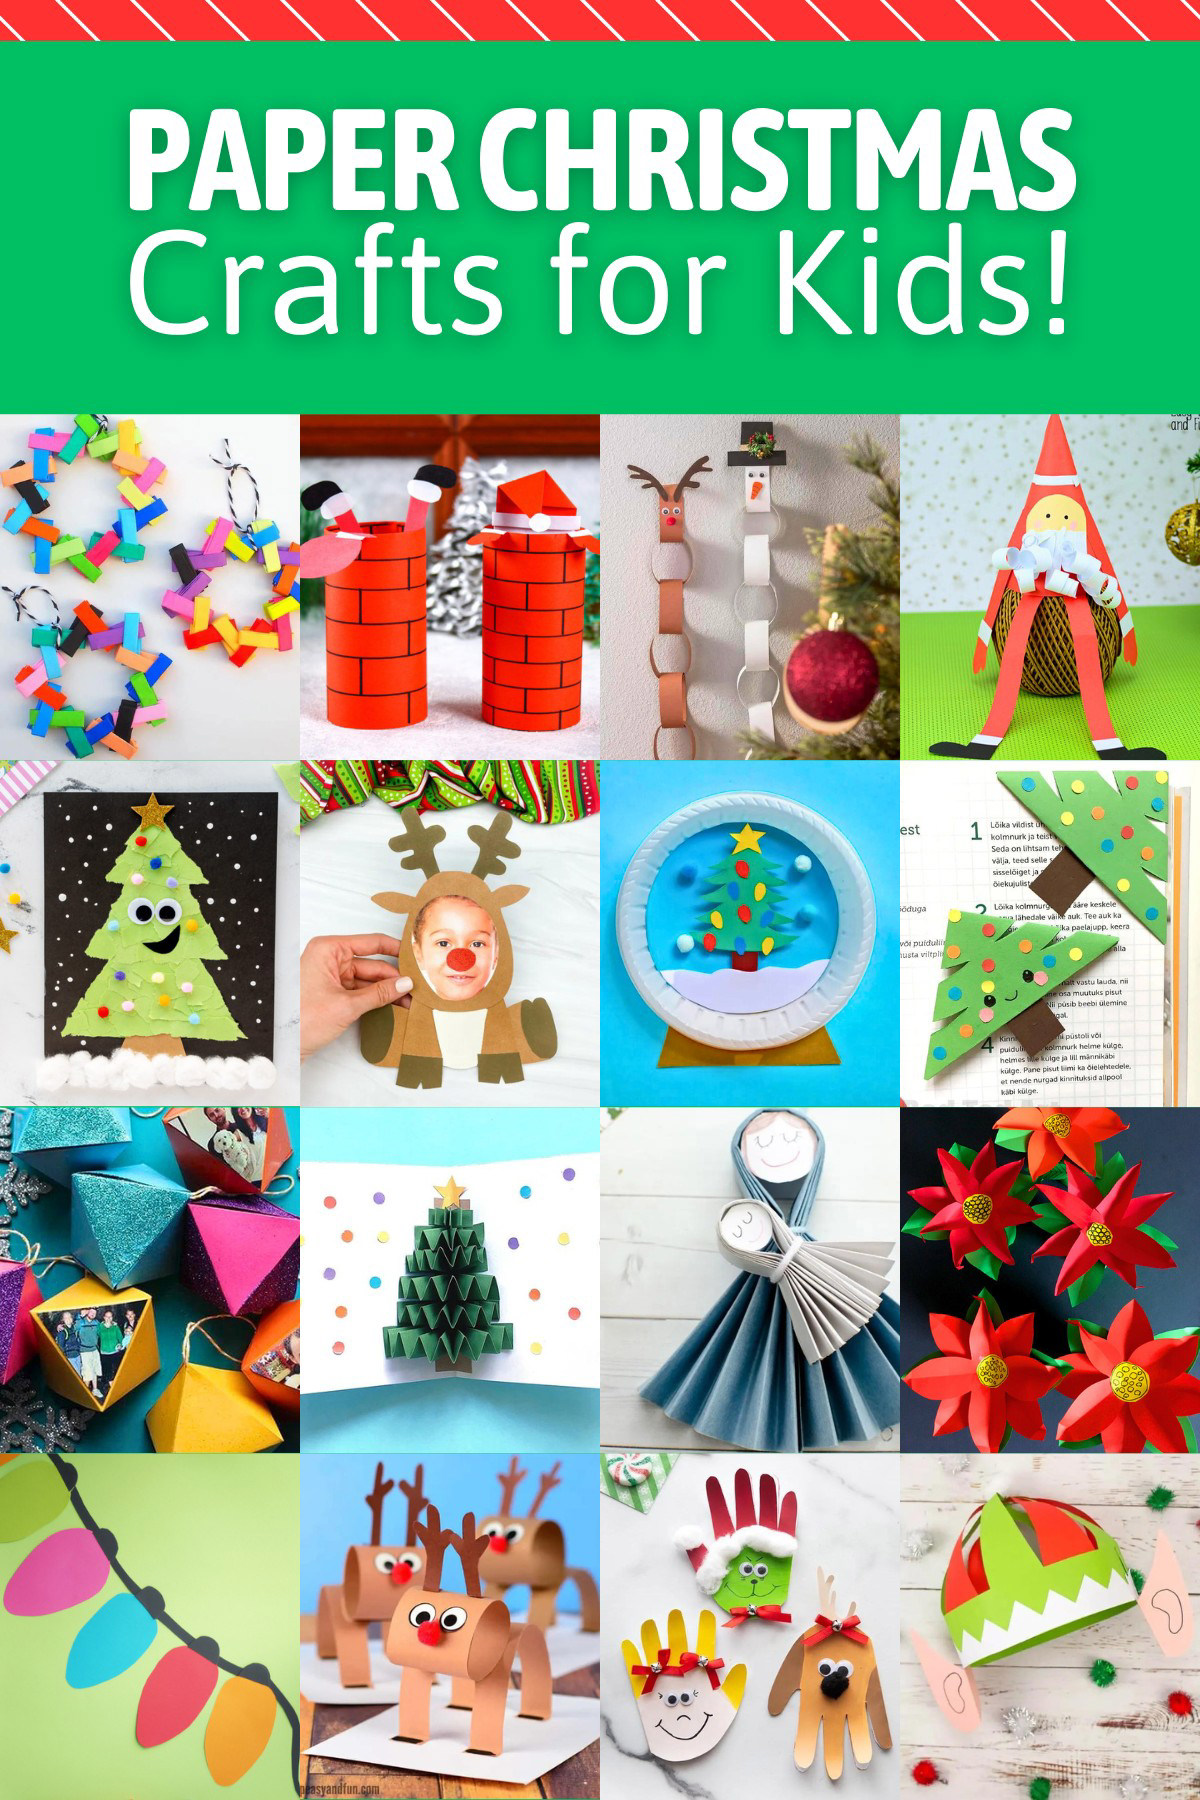 Christmas Paper Crafts for Kids: 30+ Festive Ideas!